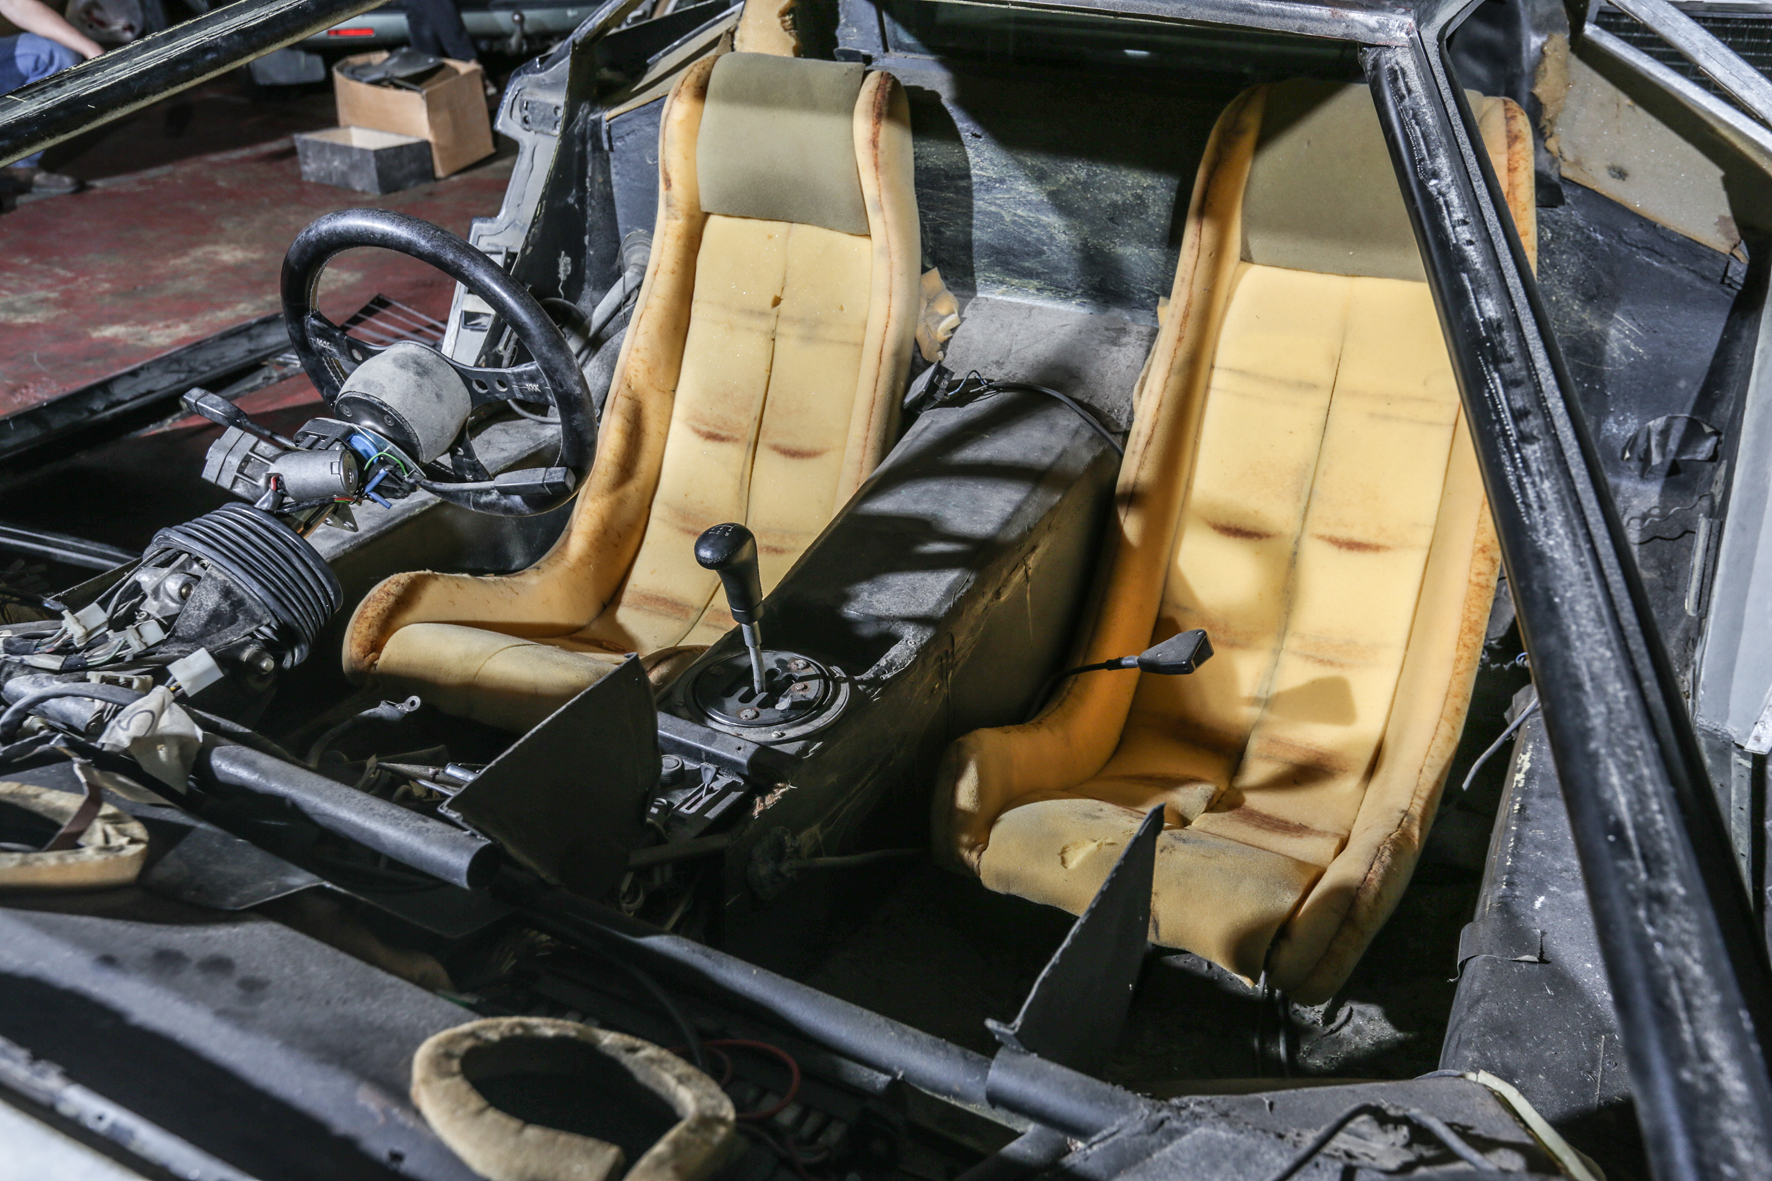 How not to build a car, Part 2: Interiors